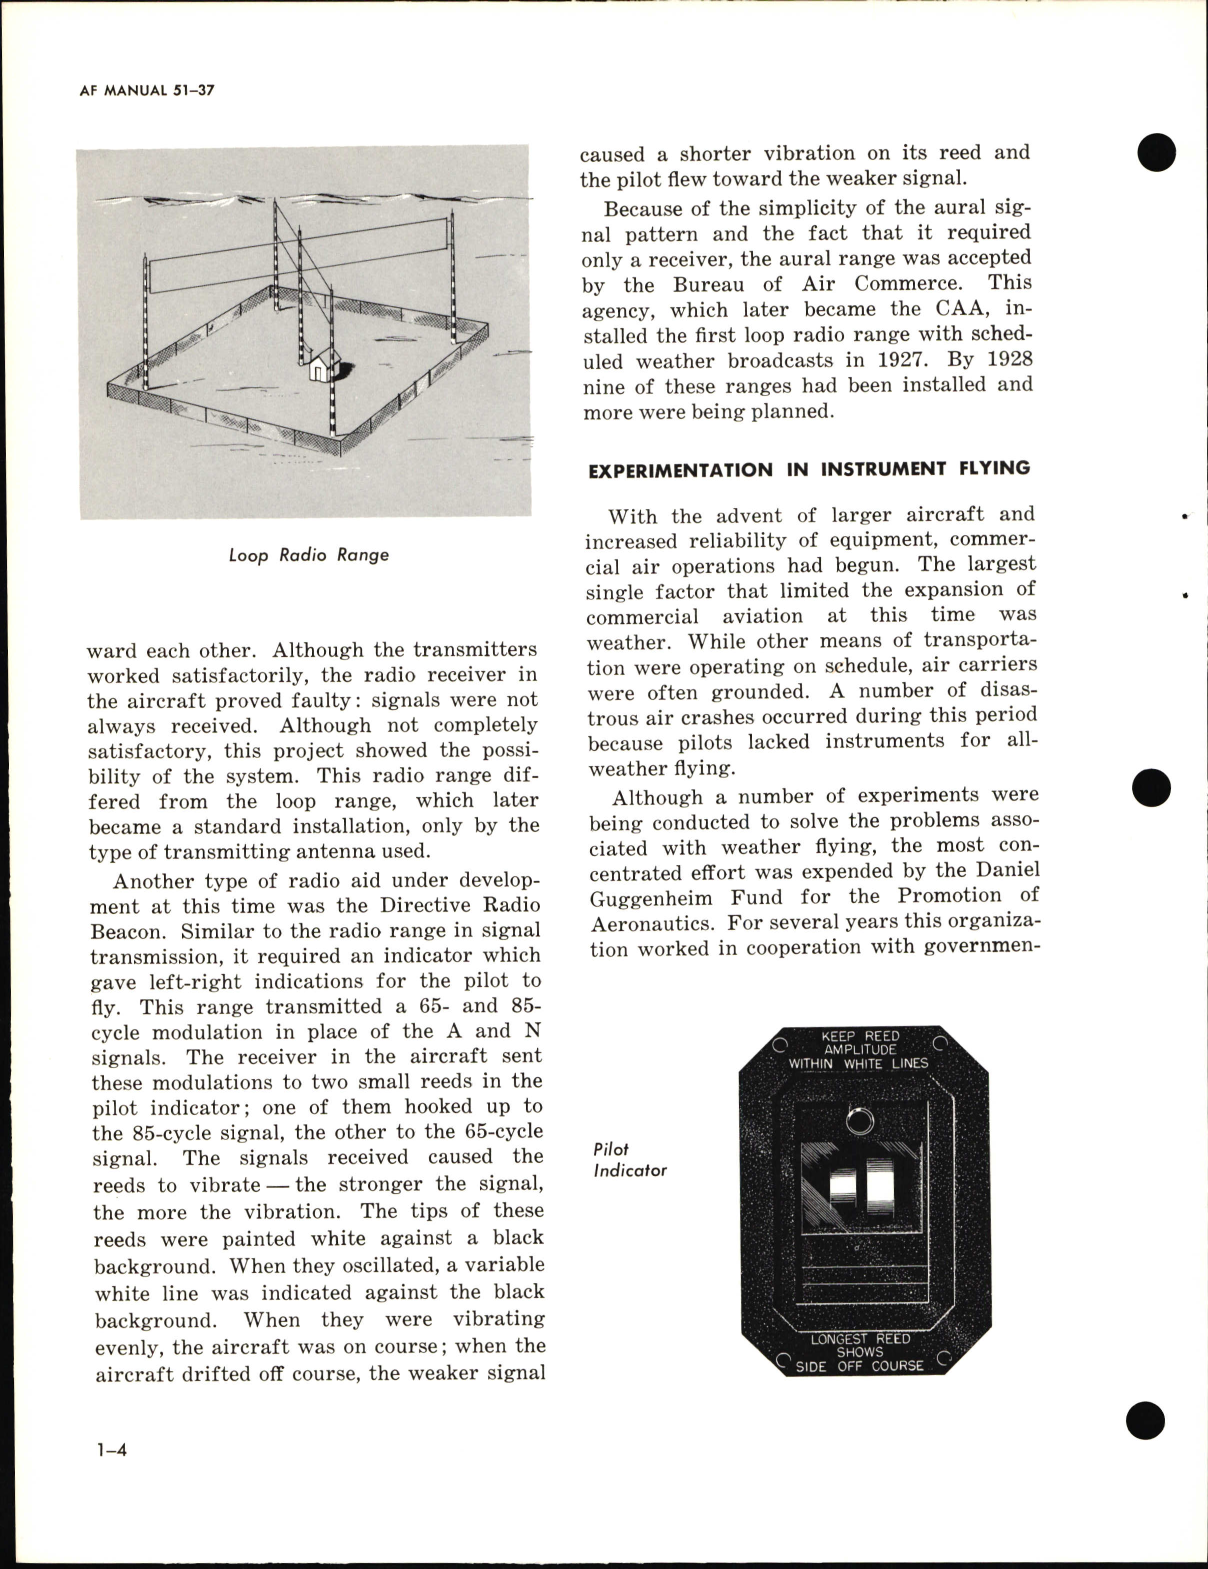 Sample page 8 from AirCorps Library document: Instrument Flying